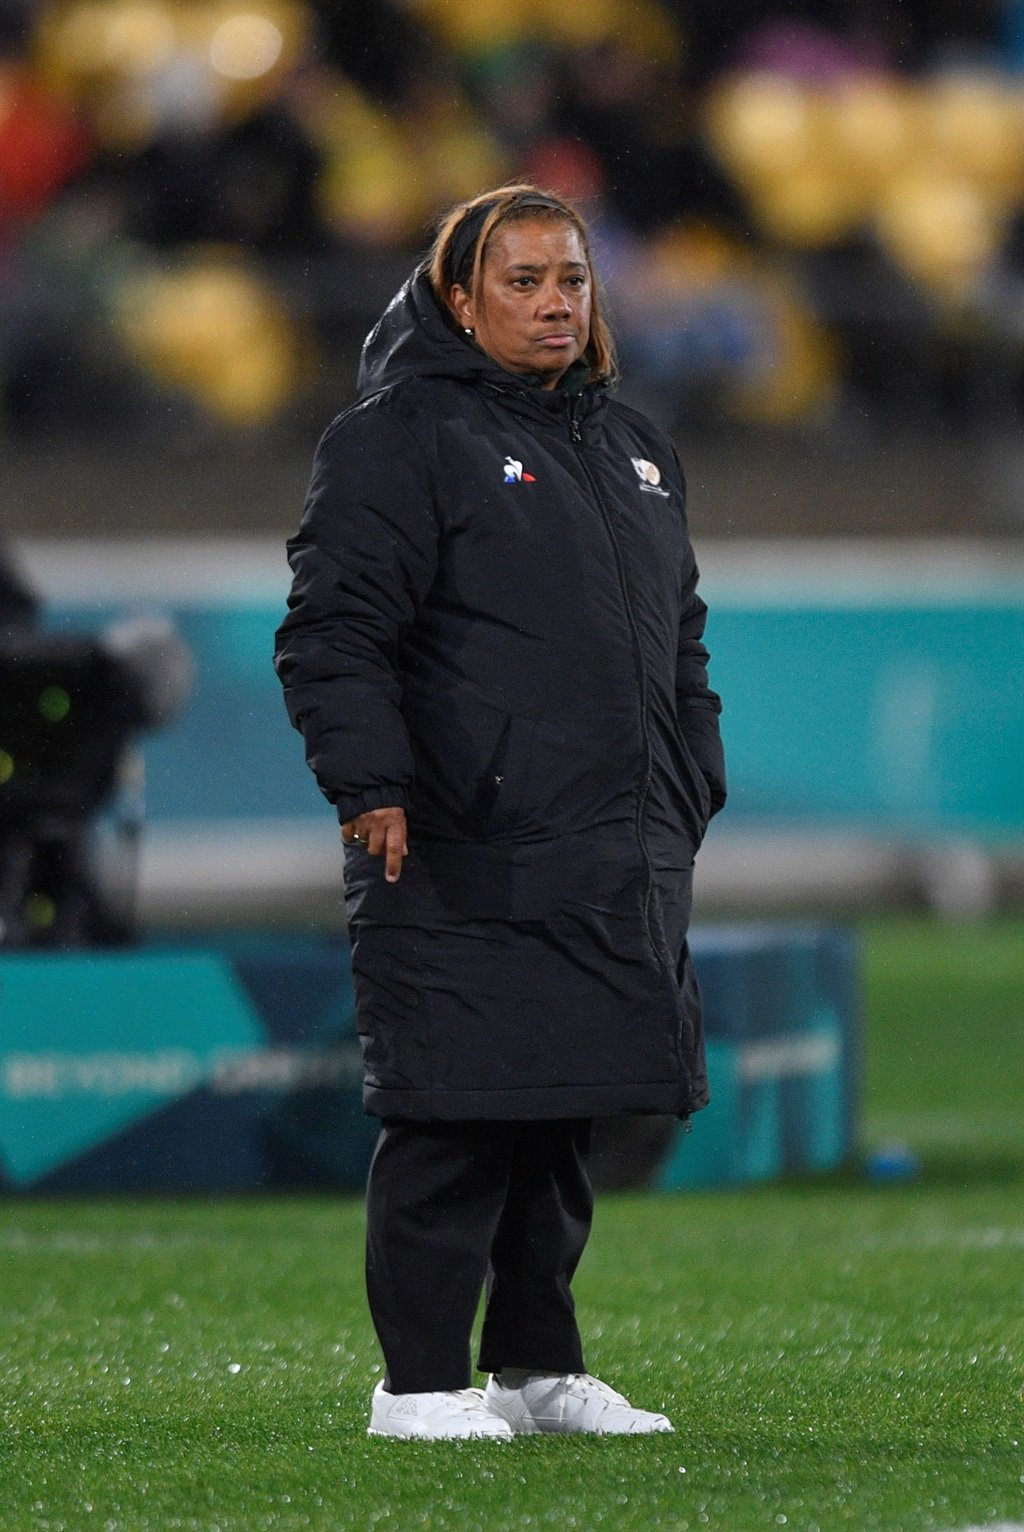 Desiree Ellis, coach of South Africa, during the FIFA Womens World Cup match between Sweden and South Africa on 23 July 2023 in Wellington Regional Stadium 